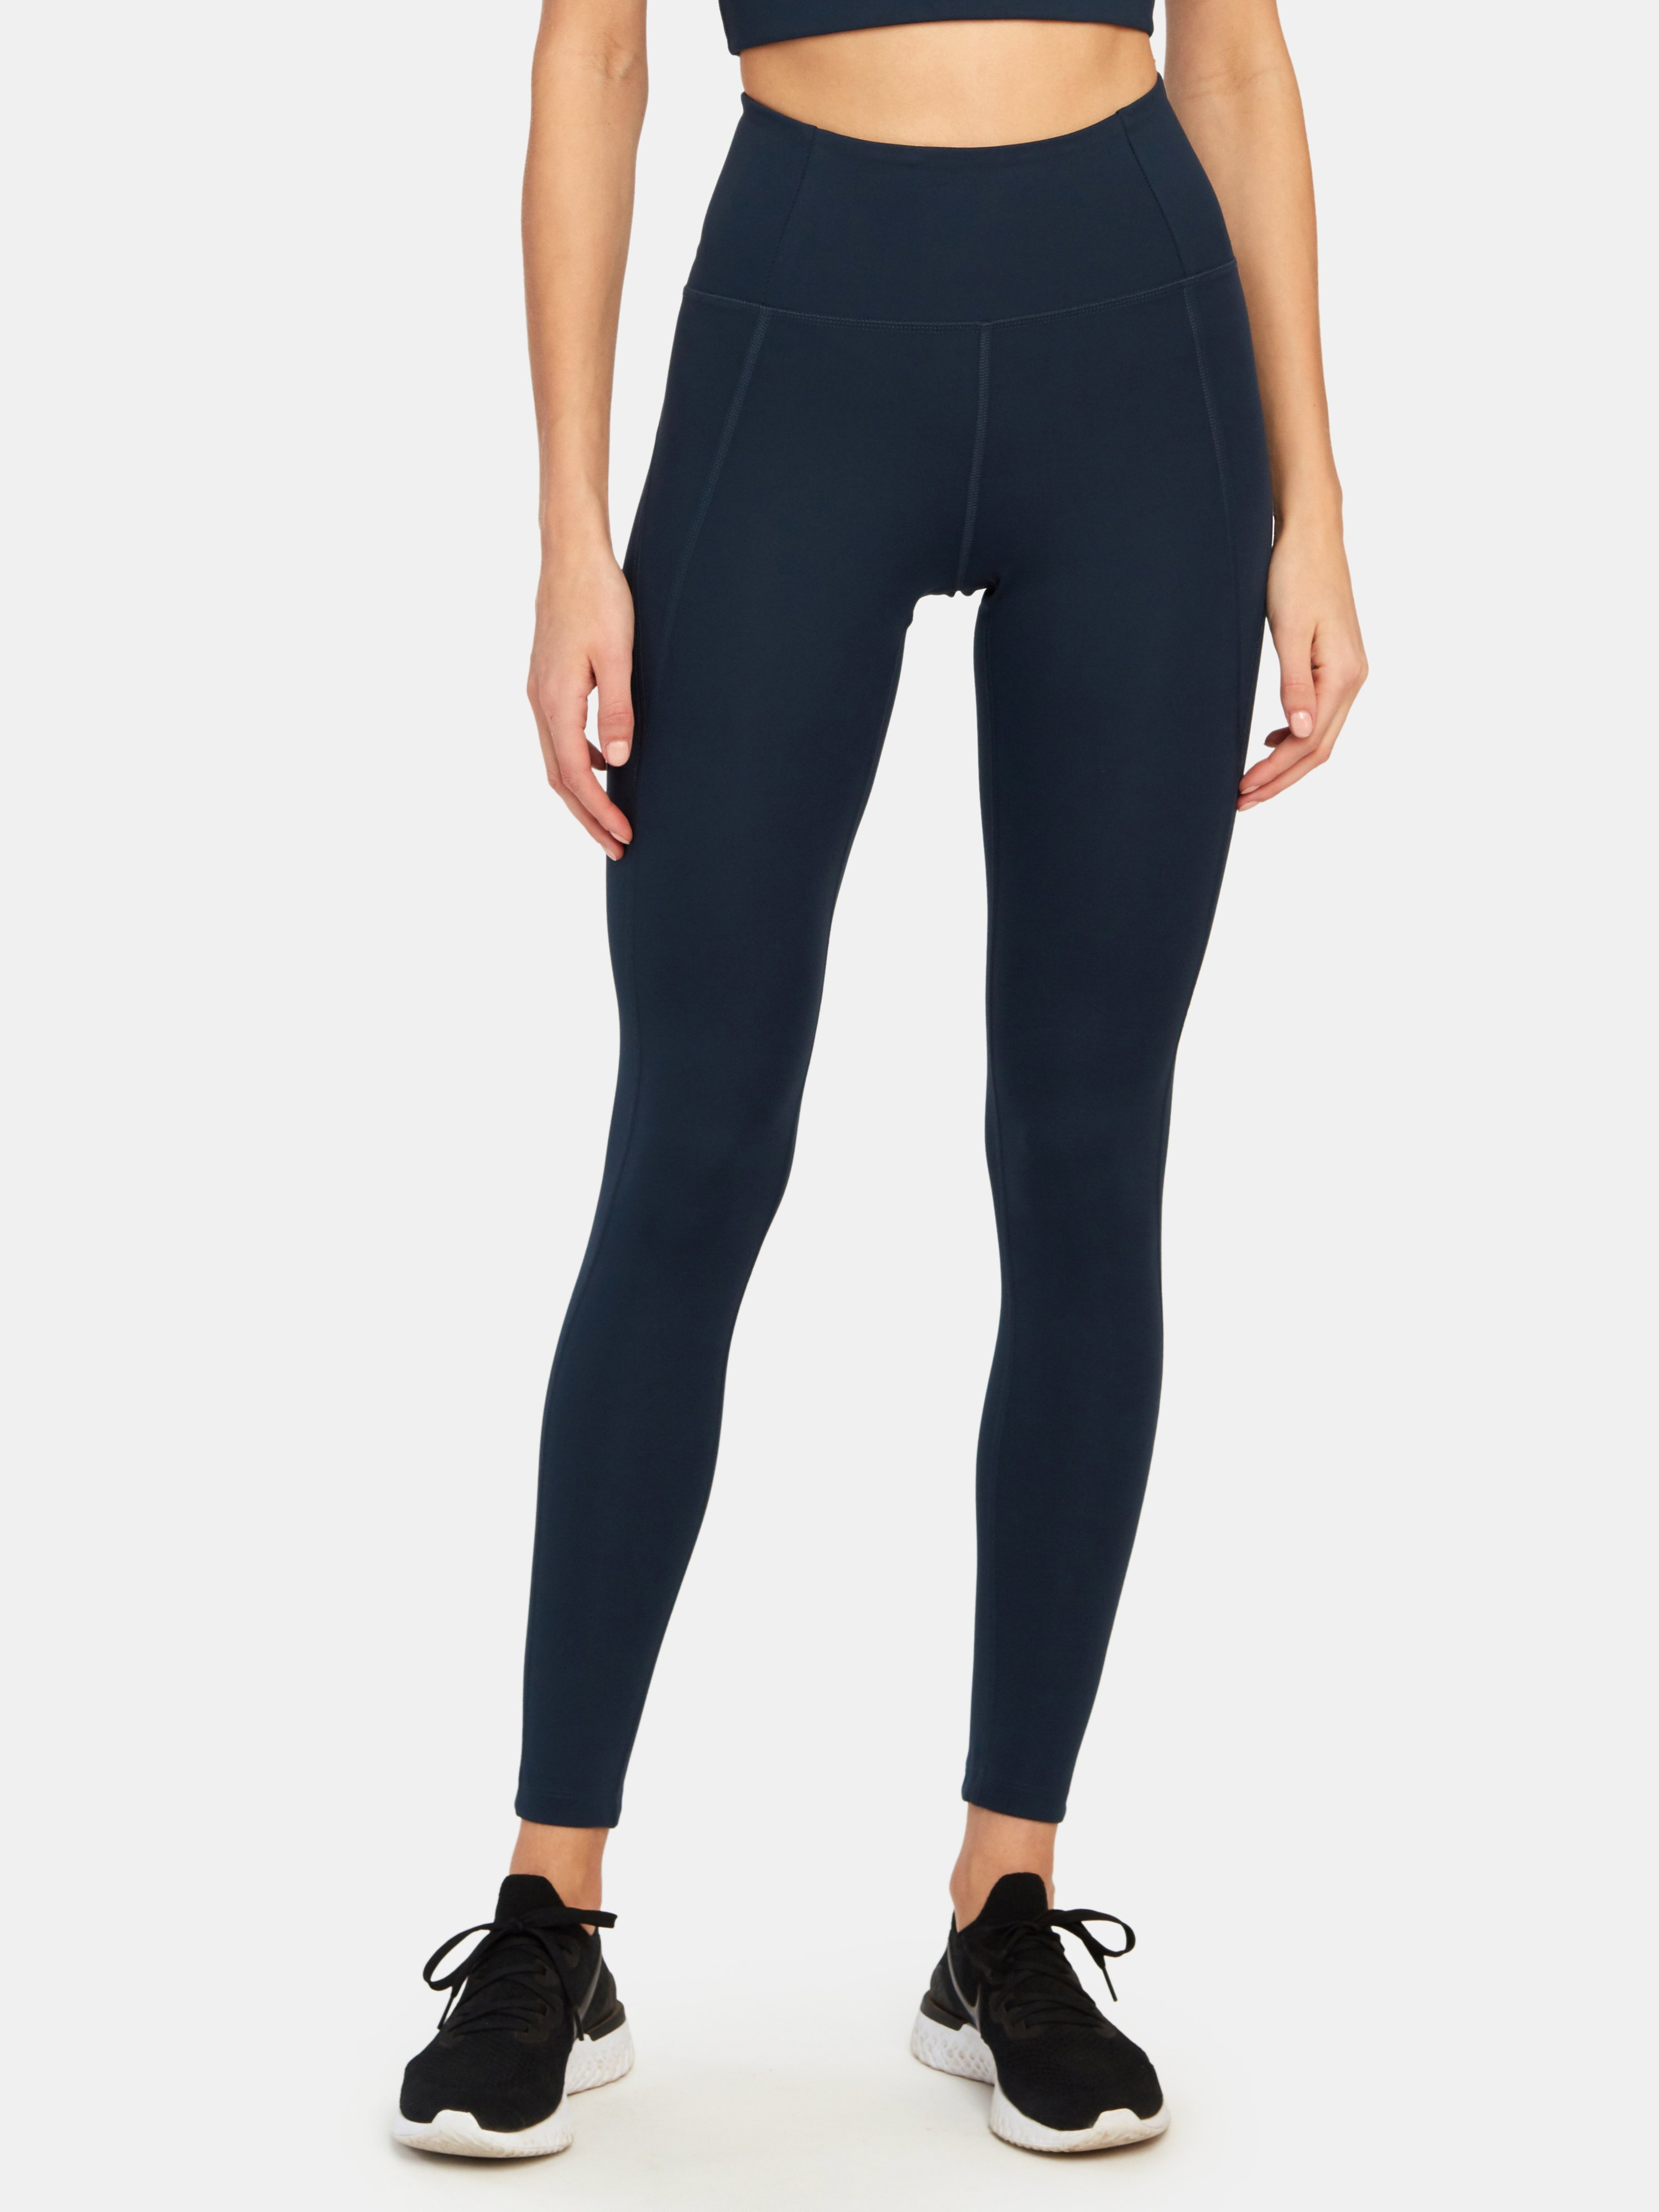 Girlfriend Collective Compressive High Rise Full Length Leggings In Midnight